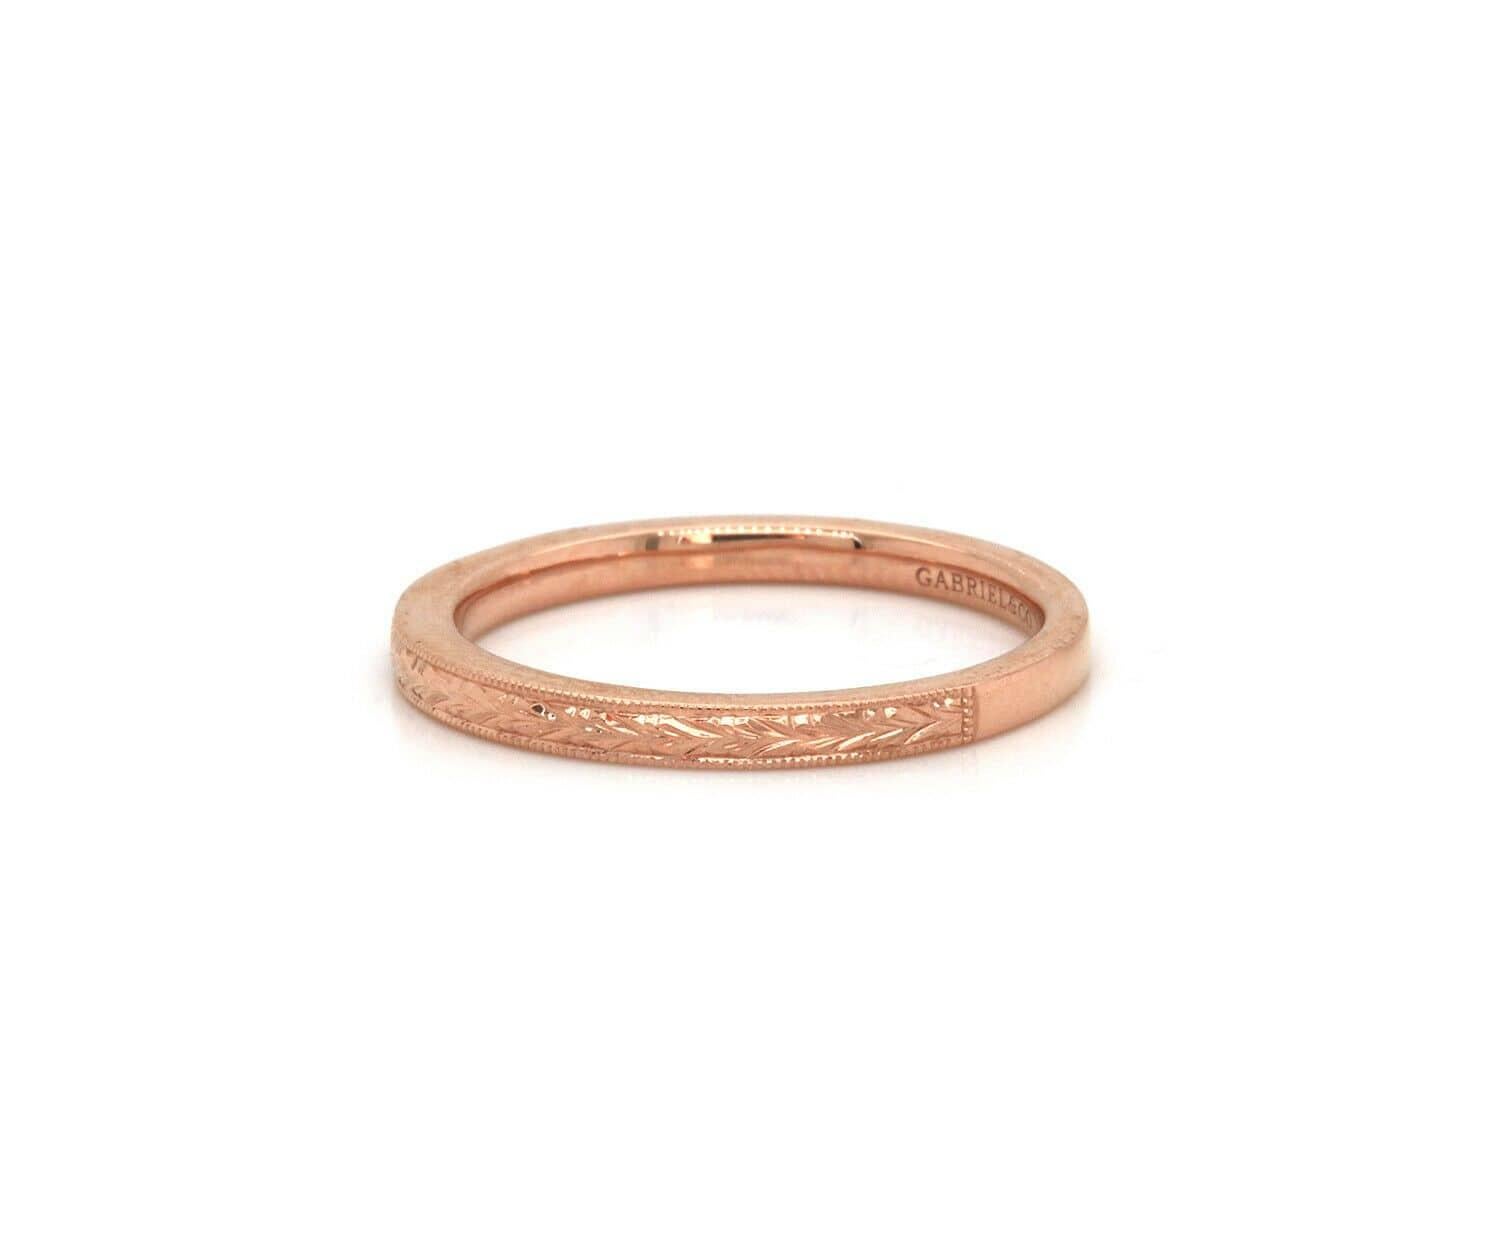 New Gabriel & Co. Filigree Engraved Band Ring in 14K

Gabriel & Co. Filigree Engraved Band Ring
14K Rose Gold
Band Width: Approx. 2.0 MM
Ring Size: 6.50 (US)
Weight: Approx. 2.40 Grams
Stamped: GABRIEL & CO., 14K, S1279714

Condition:
Offered for